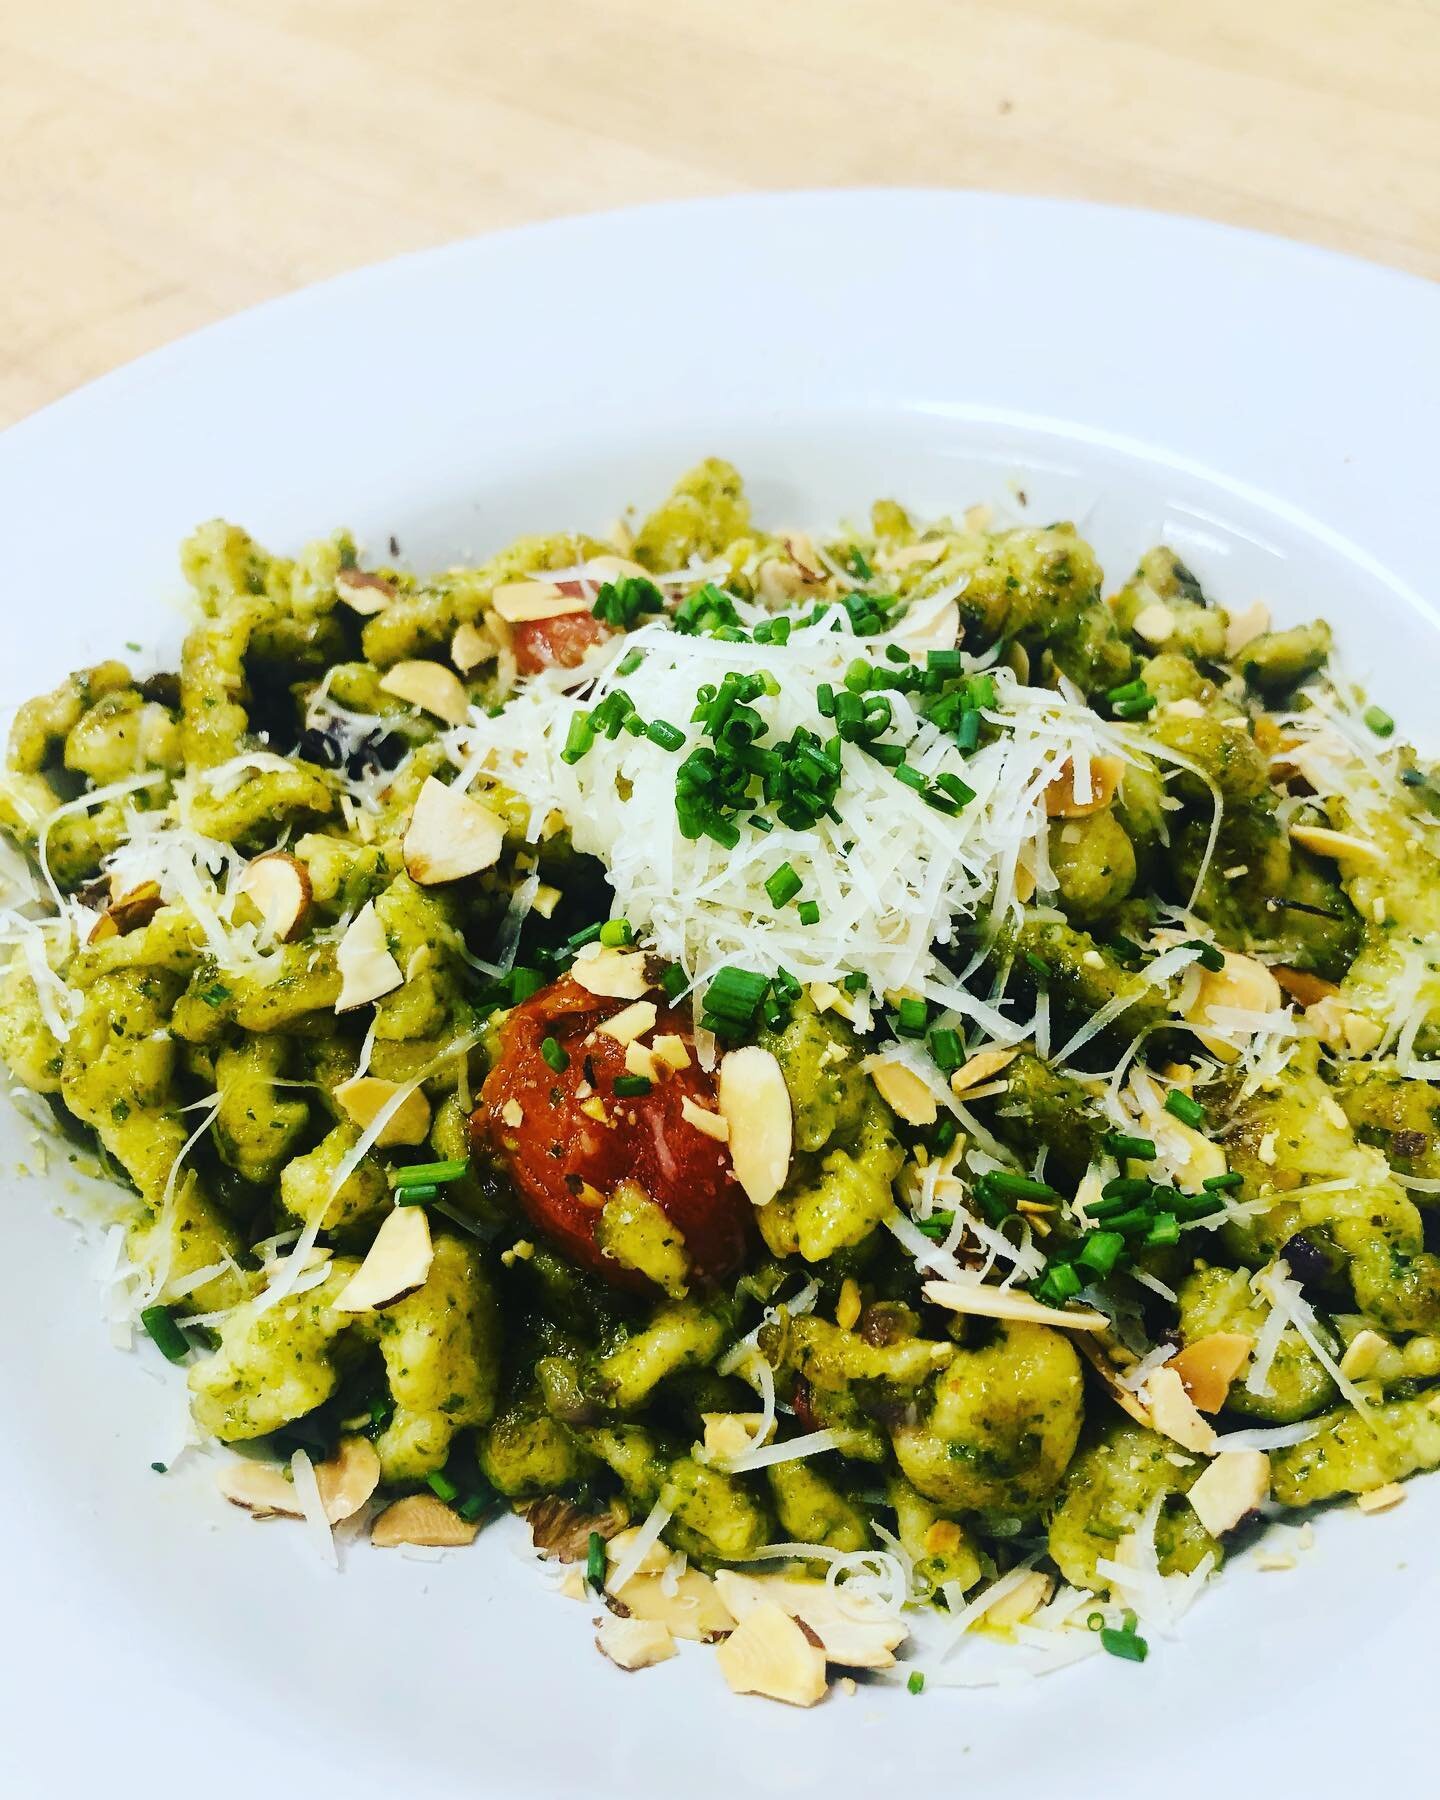 SATURDAY SPECIALS!! Pesto sp&auml;tzle, poppyseed salad &amp; savory handpies!!
Come get some, we&rsquo;re open at 8am!!

#sp&auml;tzle#poppyseed#freshtomatoes#brunch#pdxfood#pdxfoodie#eaterpdx#pdxeater#pdxbrunch#pesto#handpies#pdxpastry#pdxbread#bre